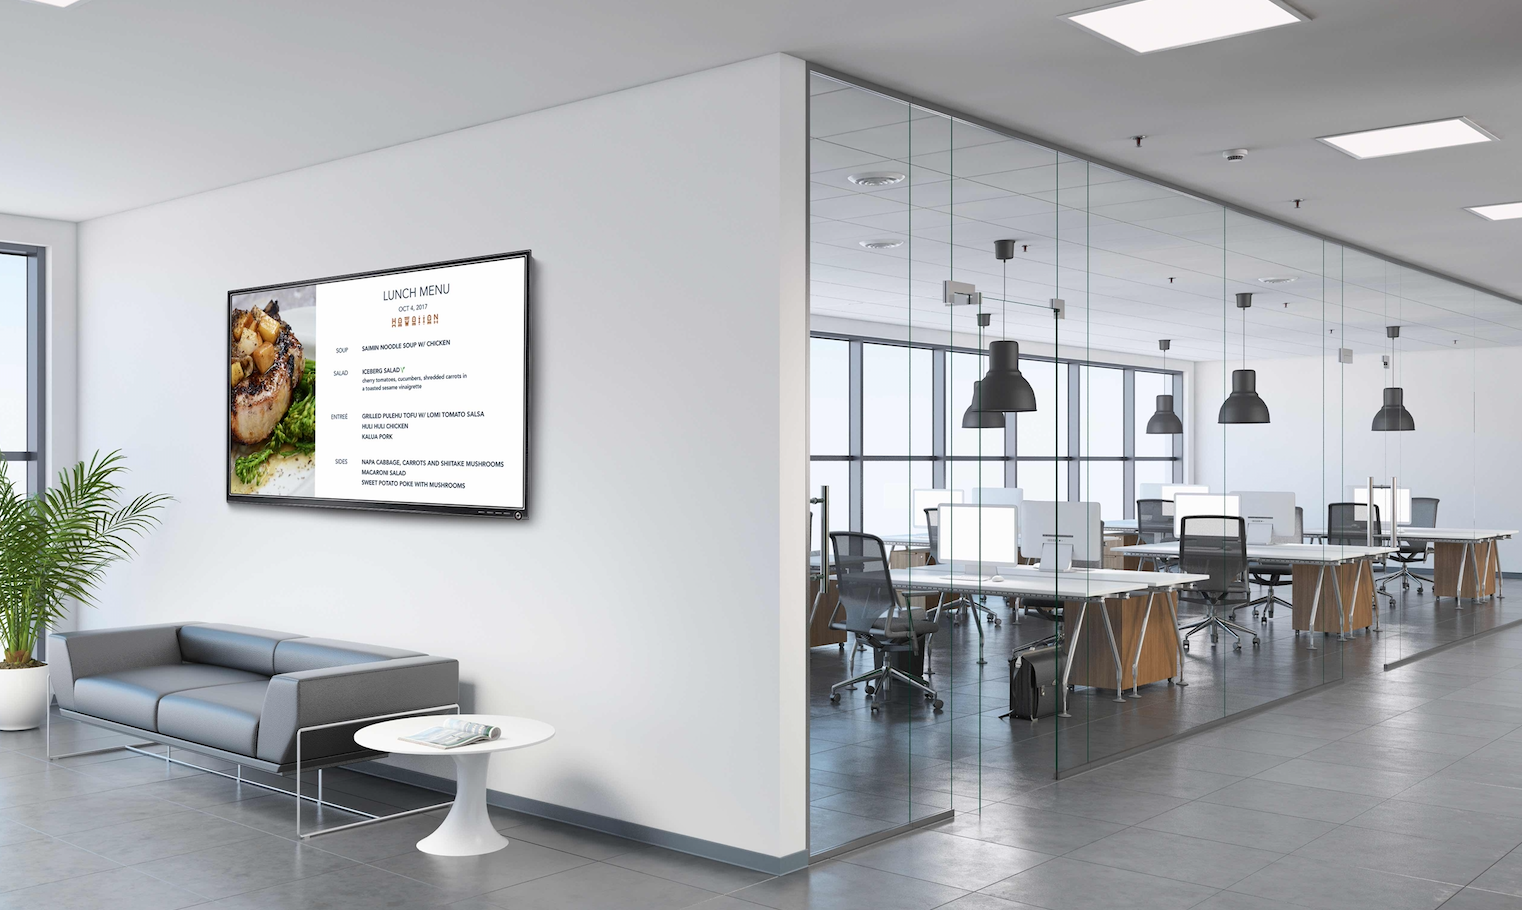 New Zoom Rooms Features: Digital Signage & More Now Available